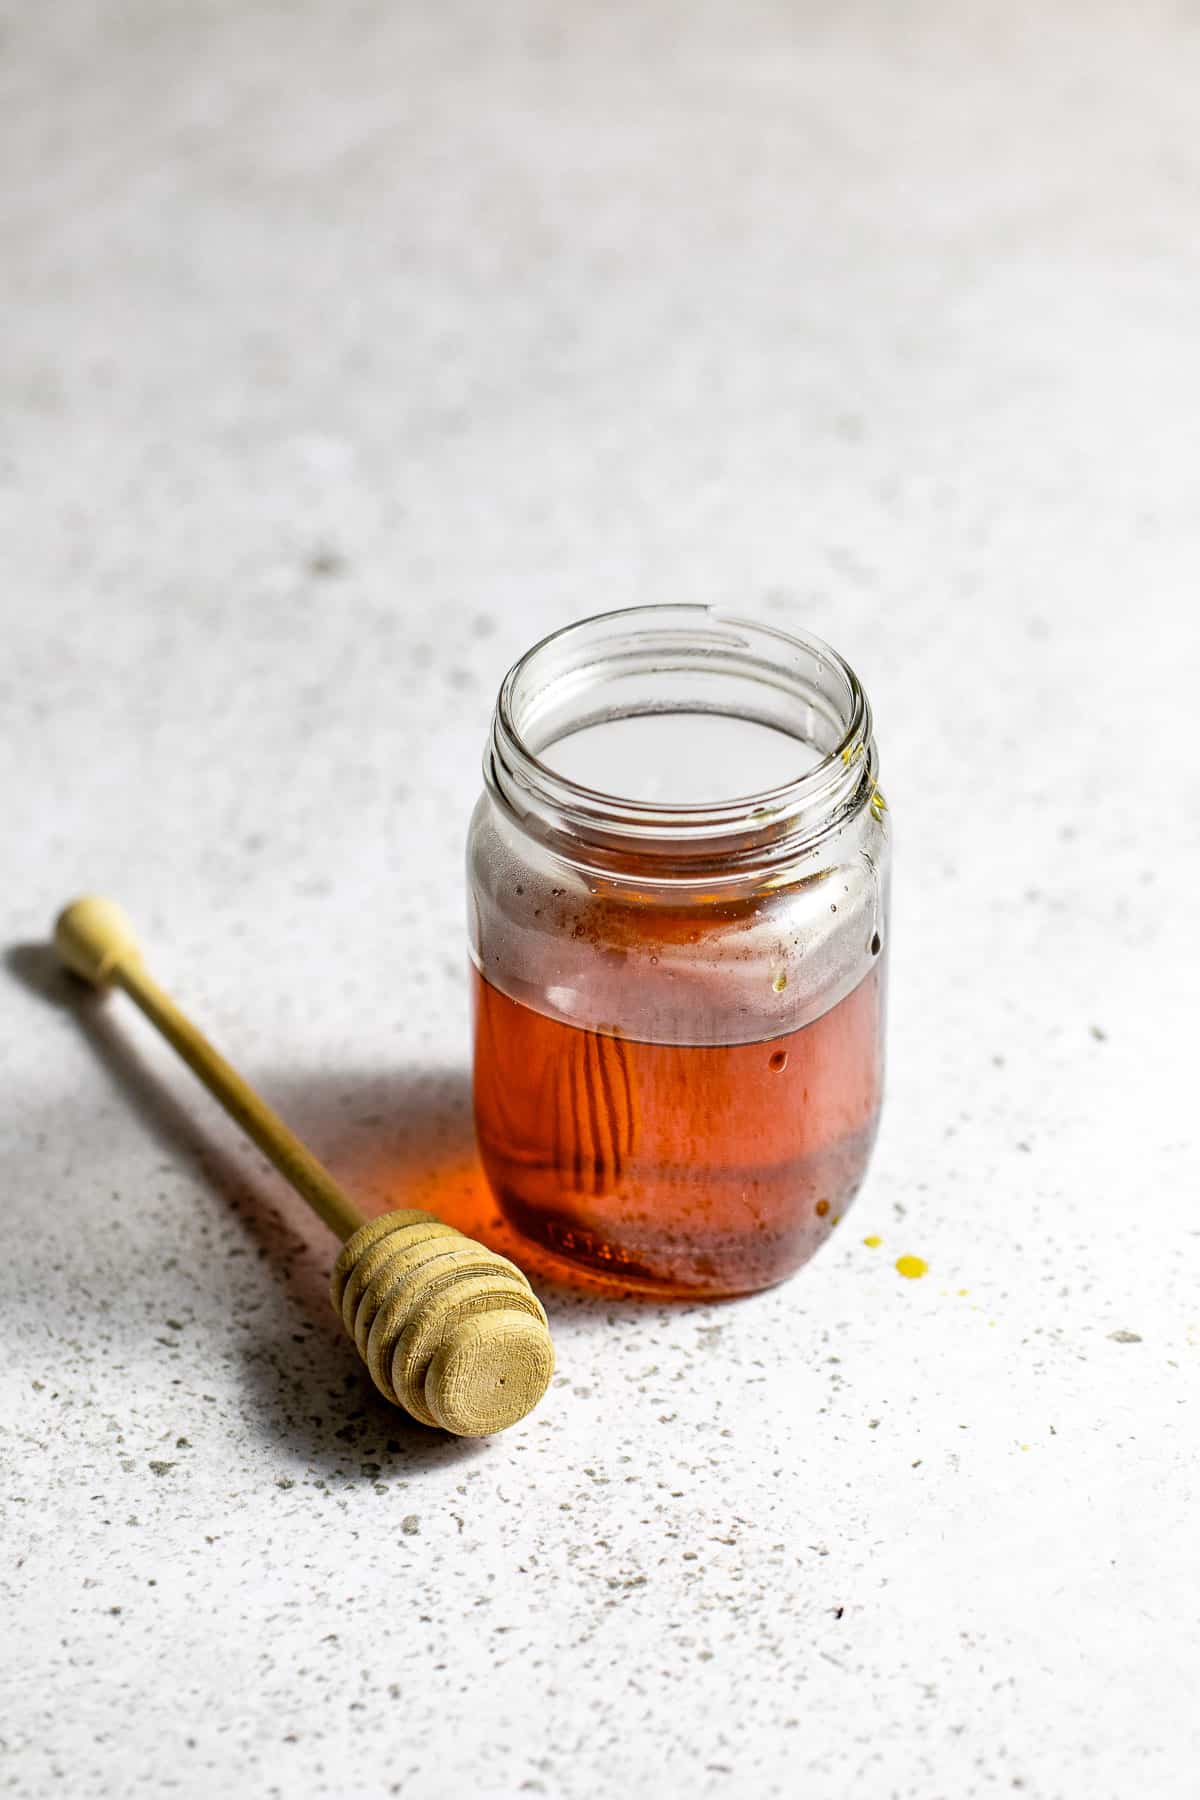 A glass jar filled with a golden-colored syrup.